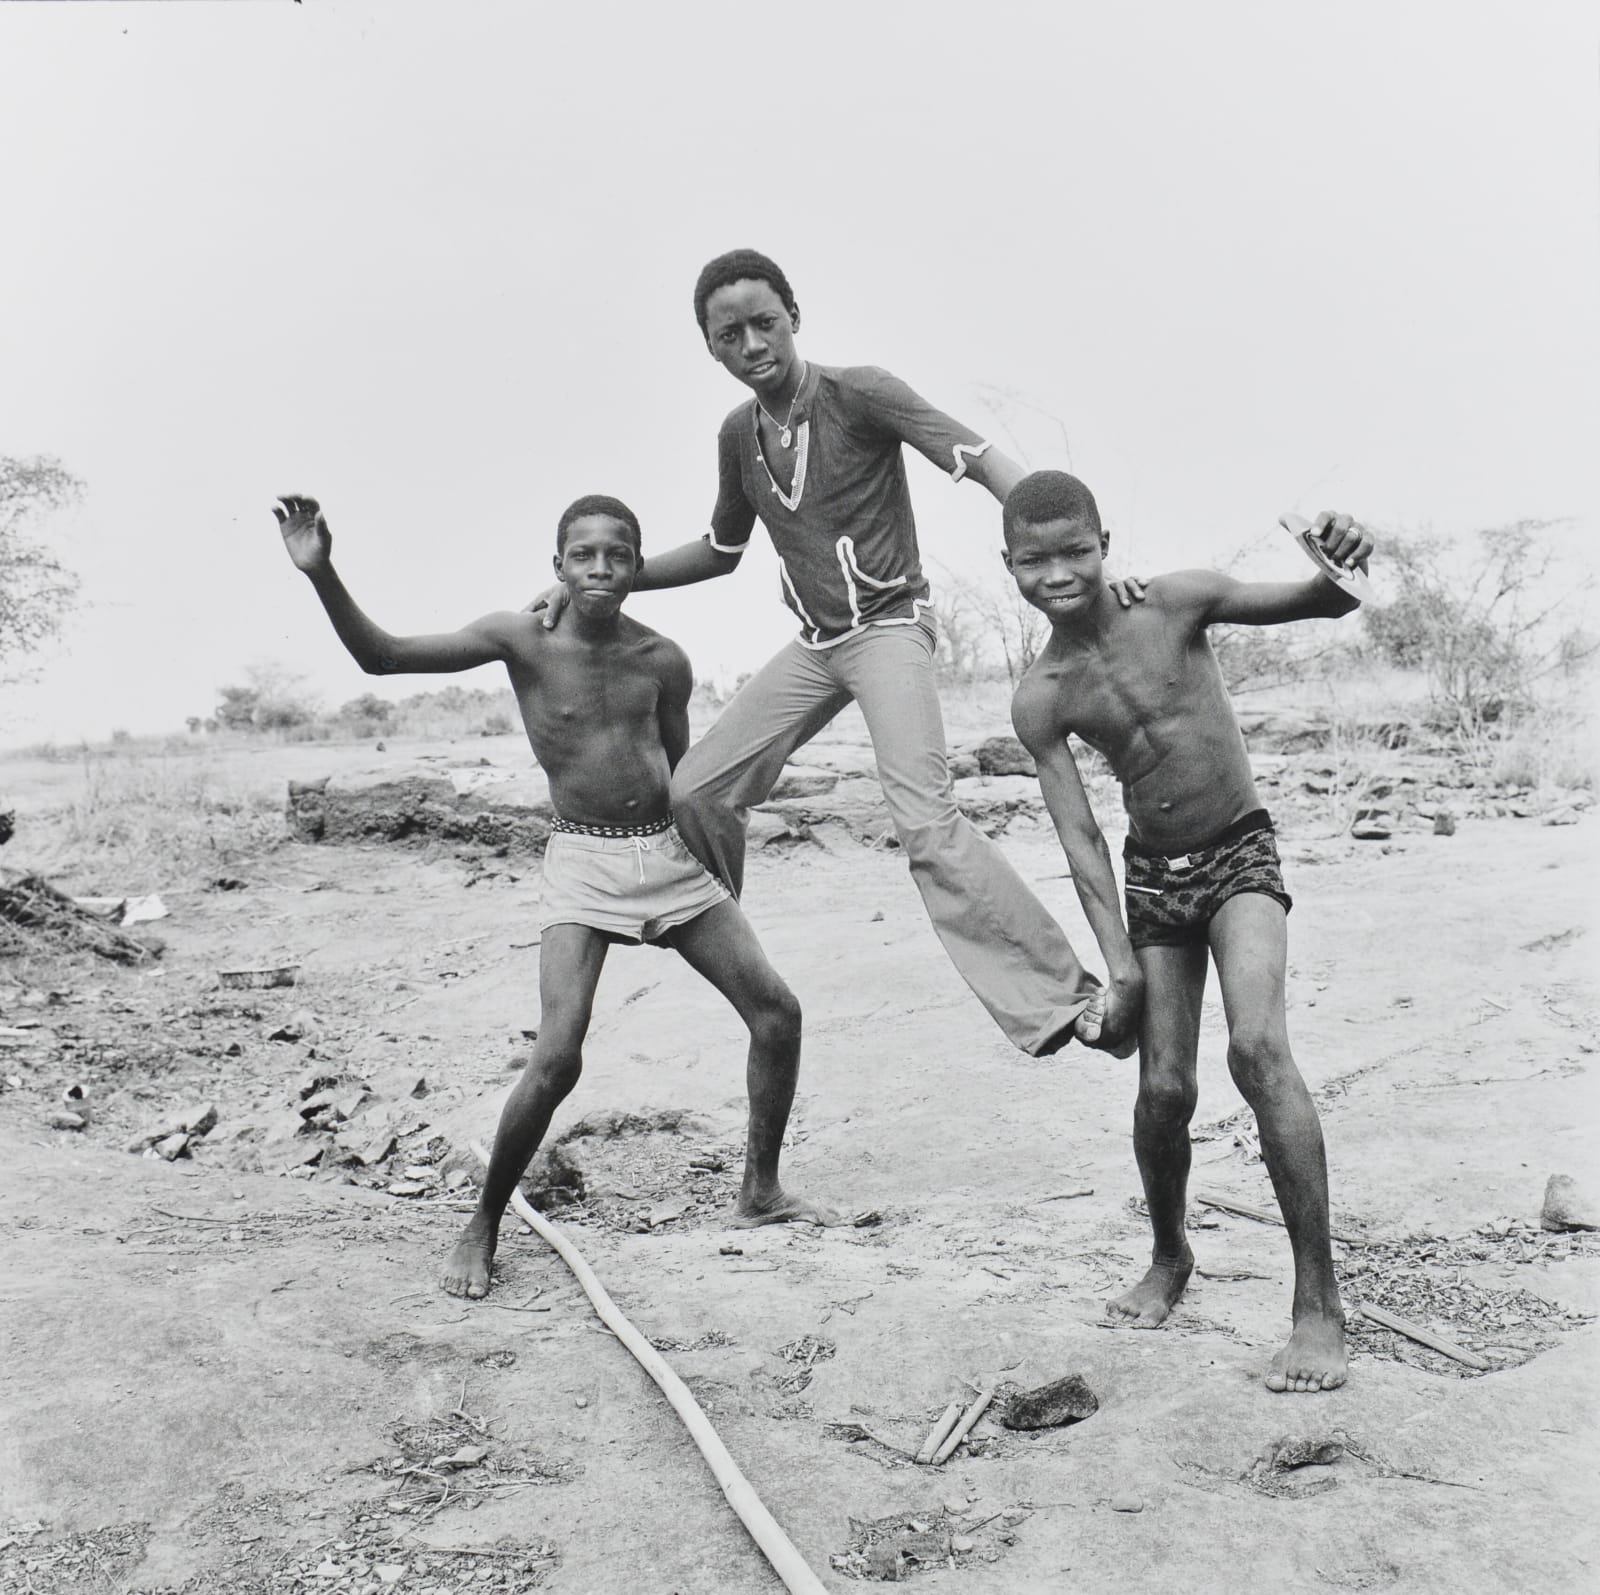 Malick Sidibe, On the Shores of the Niger, 1976